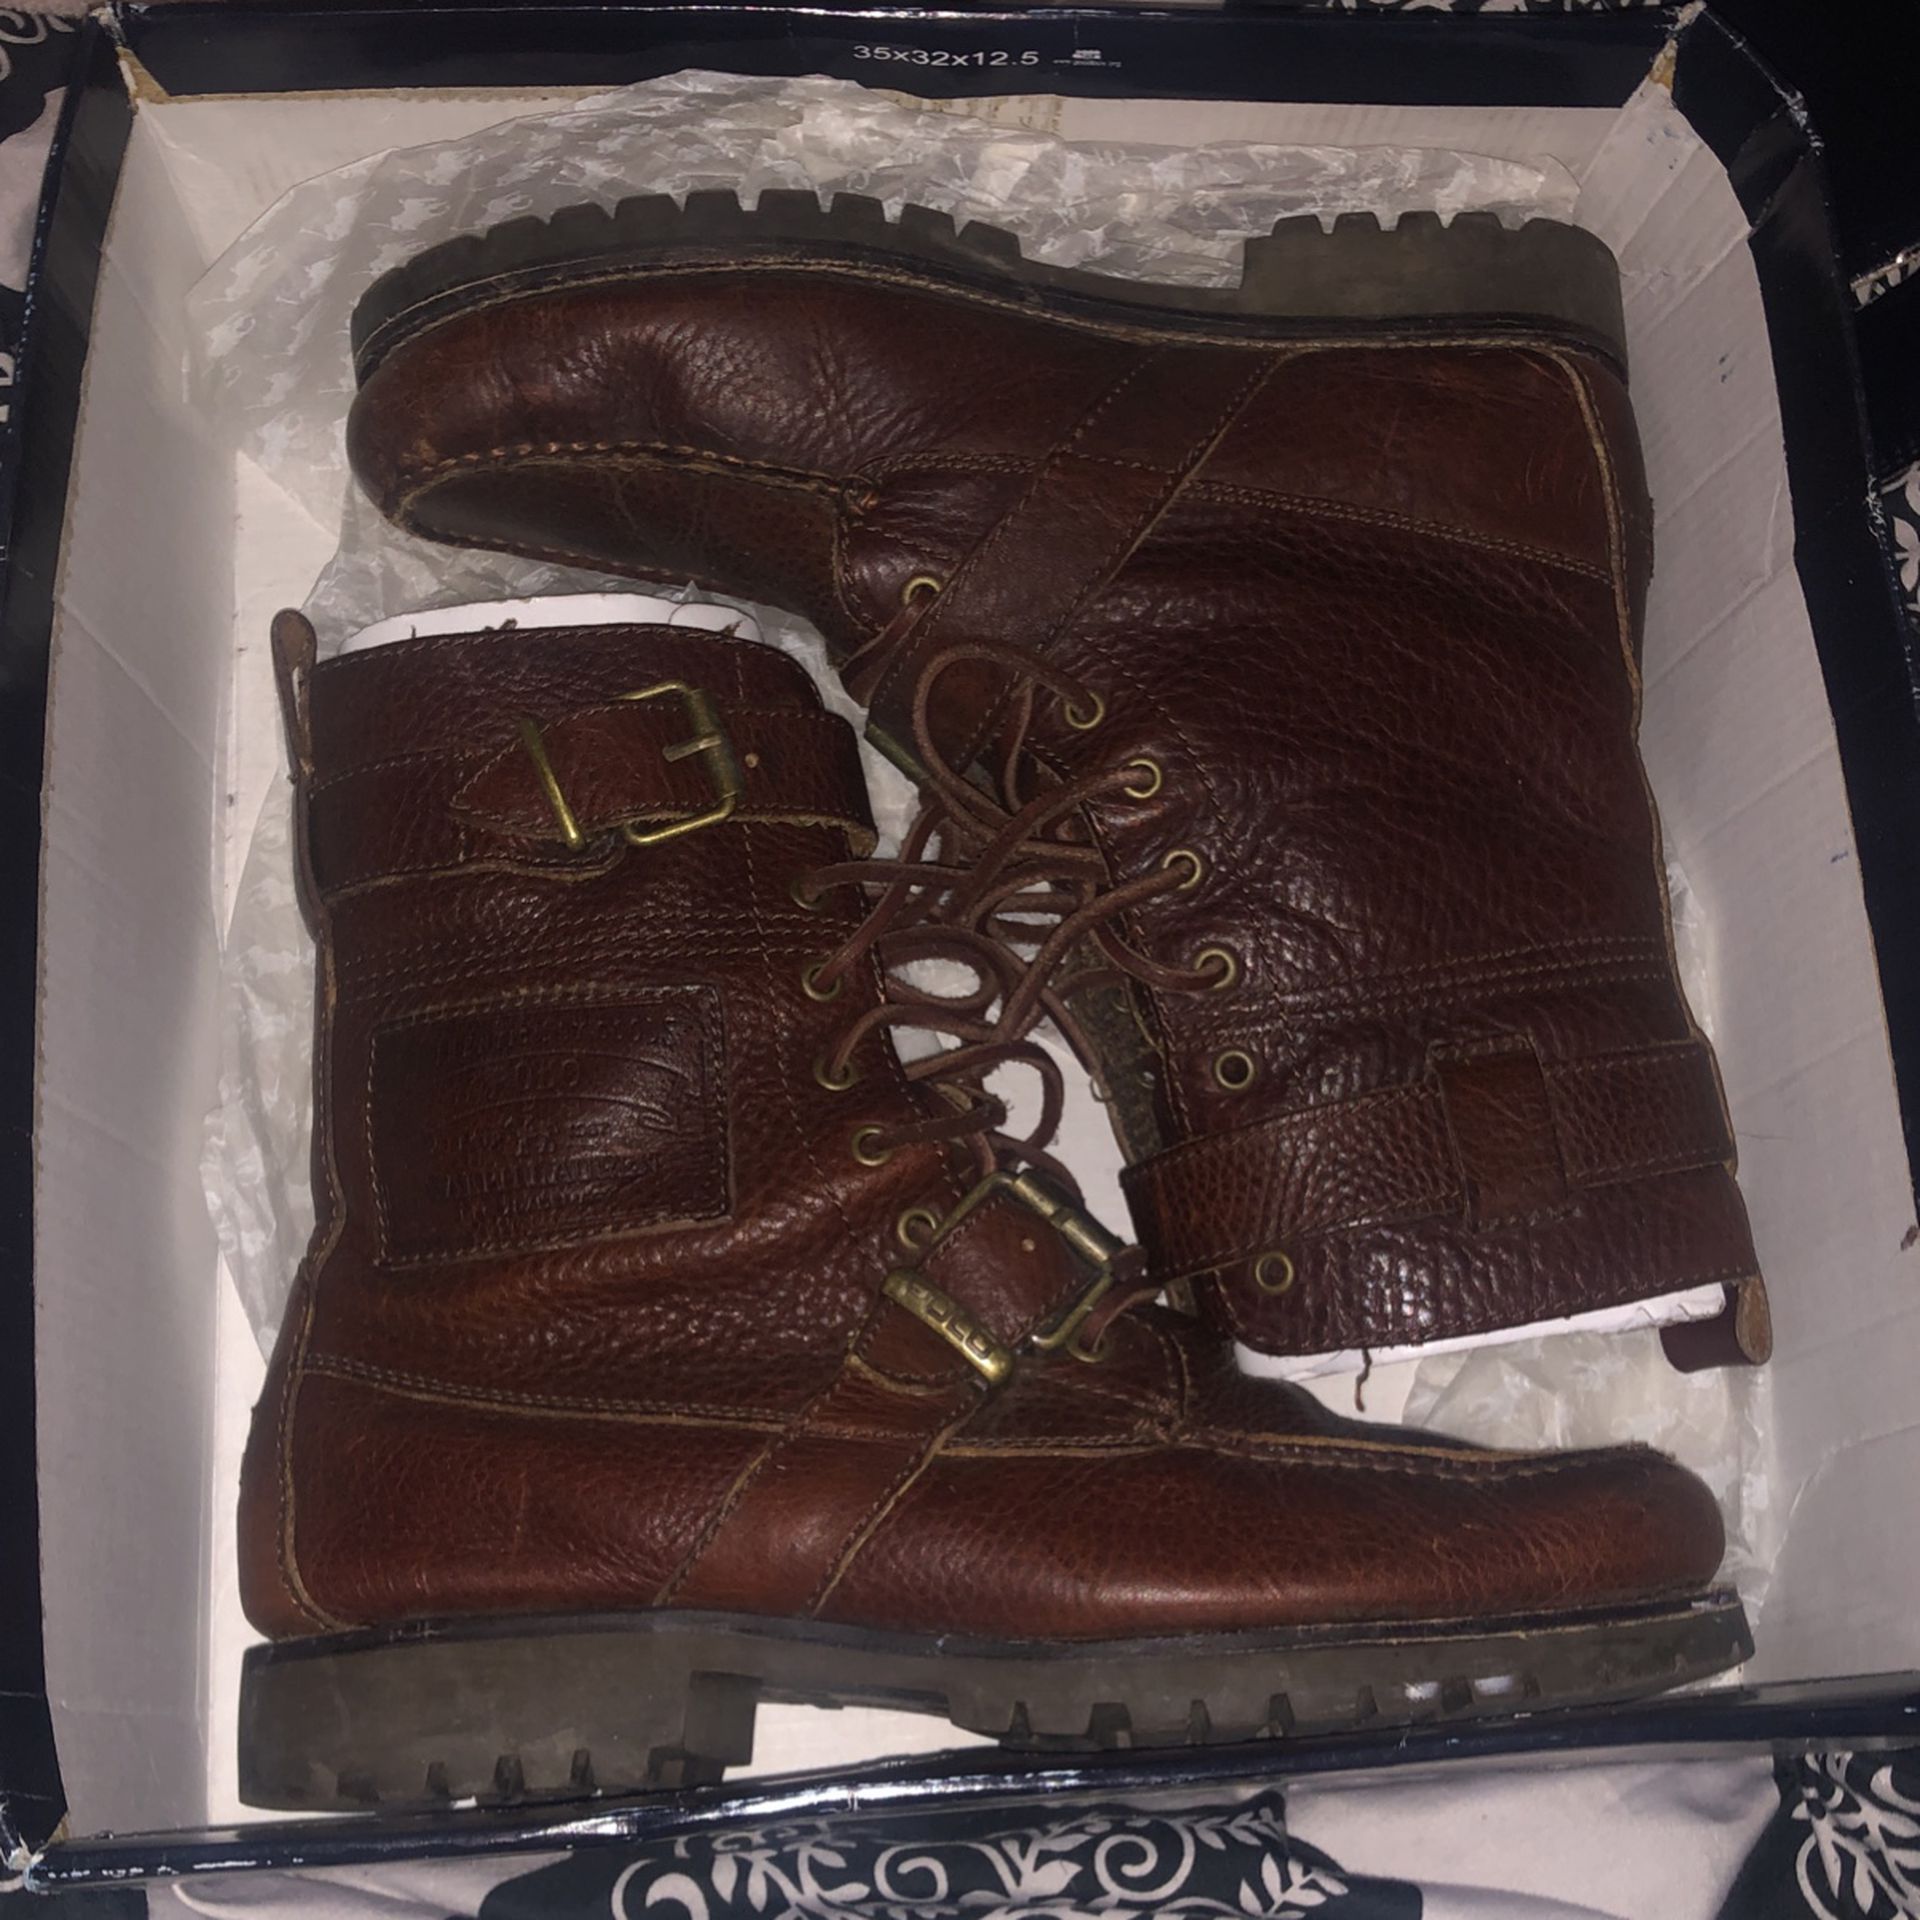 Polo Ralph Lauren Dark Brown Leather Boots Size 8.5